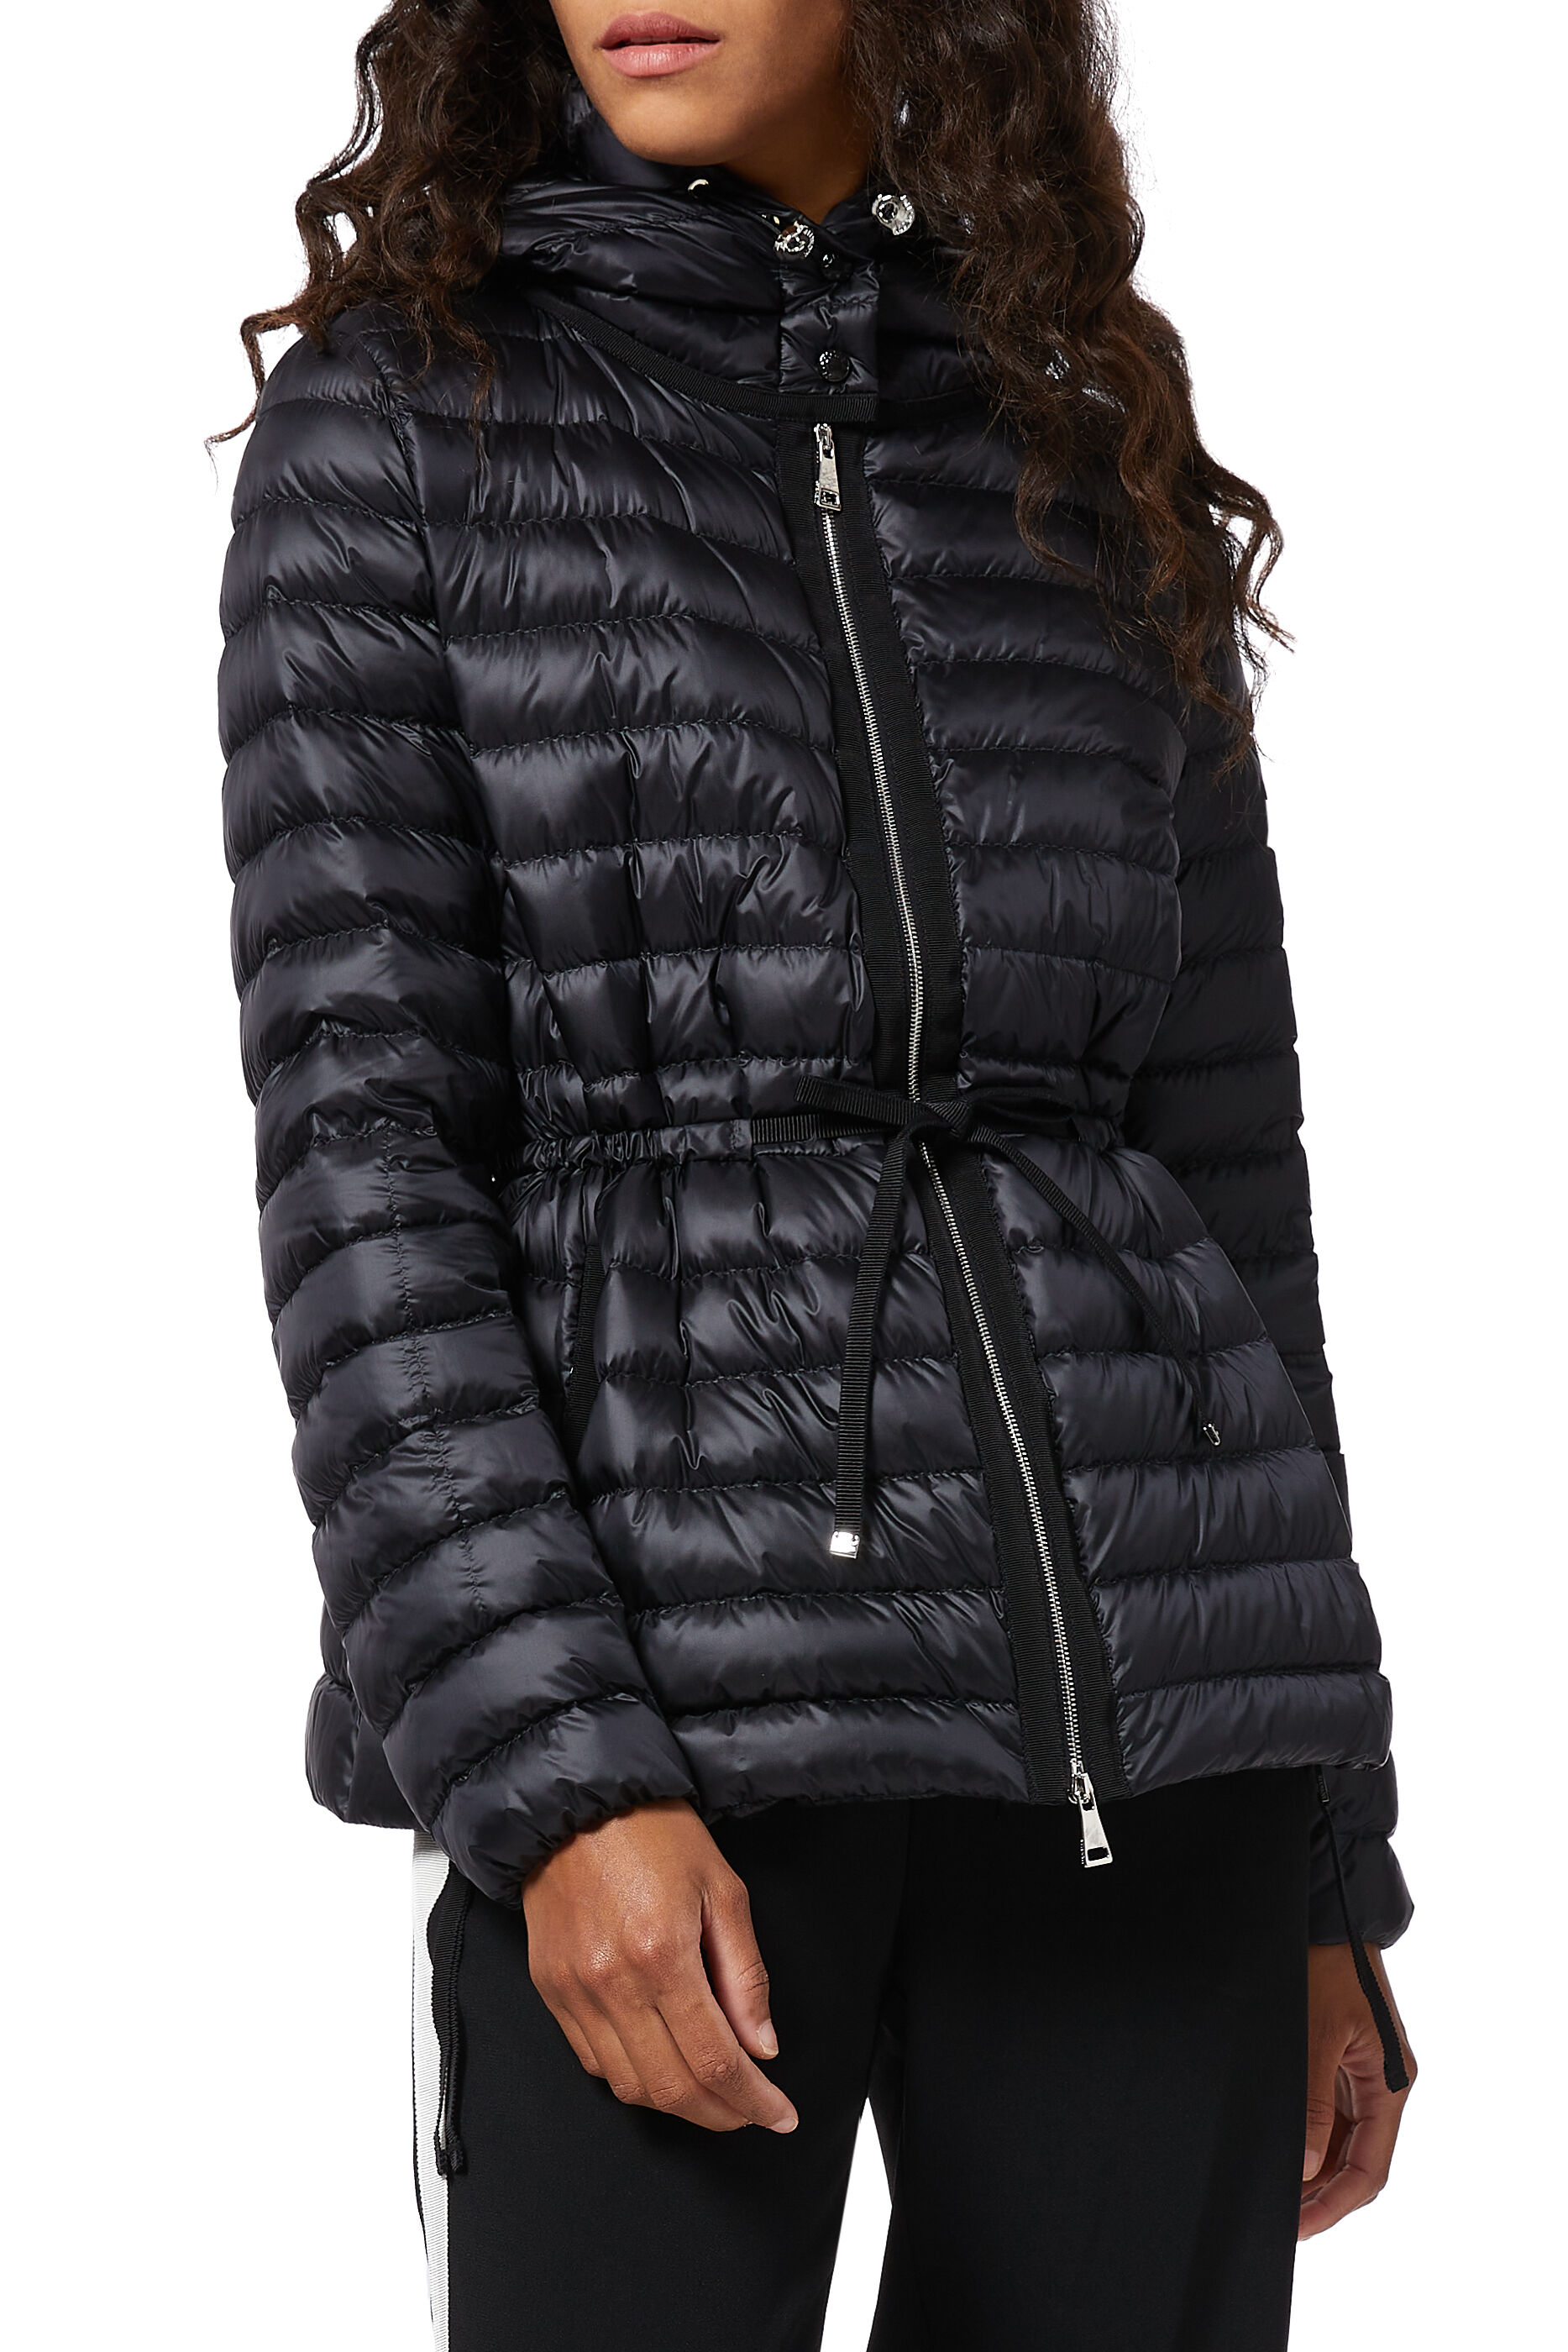 Moncler Raie Quilted Jacket - Womens 